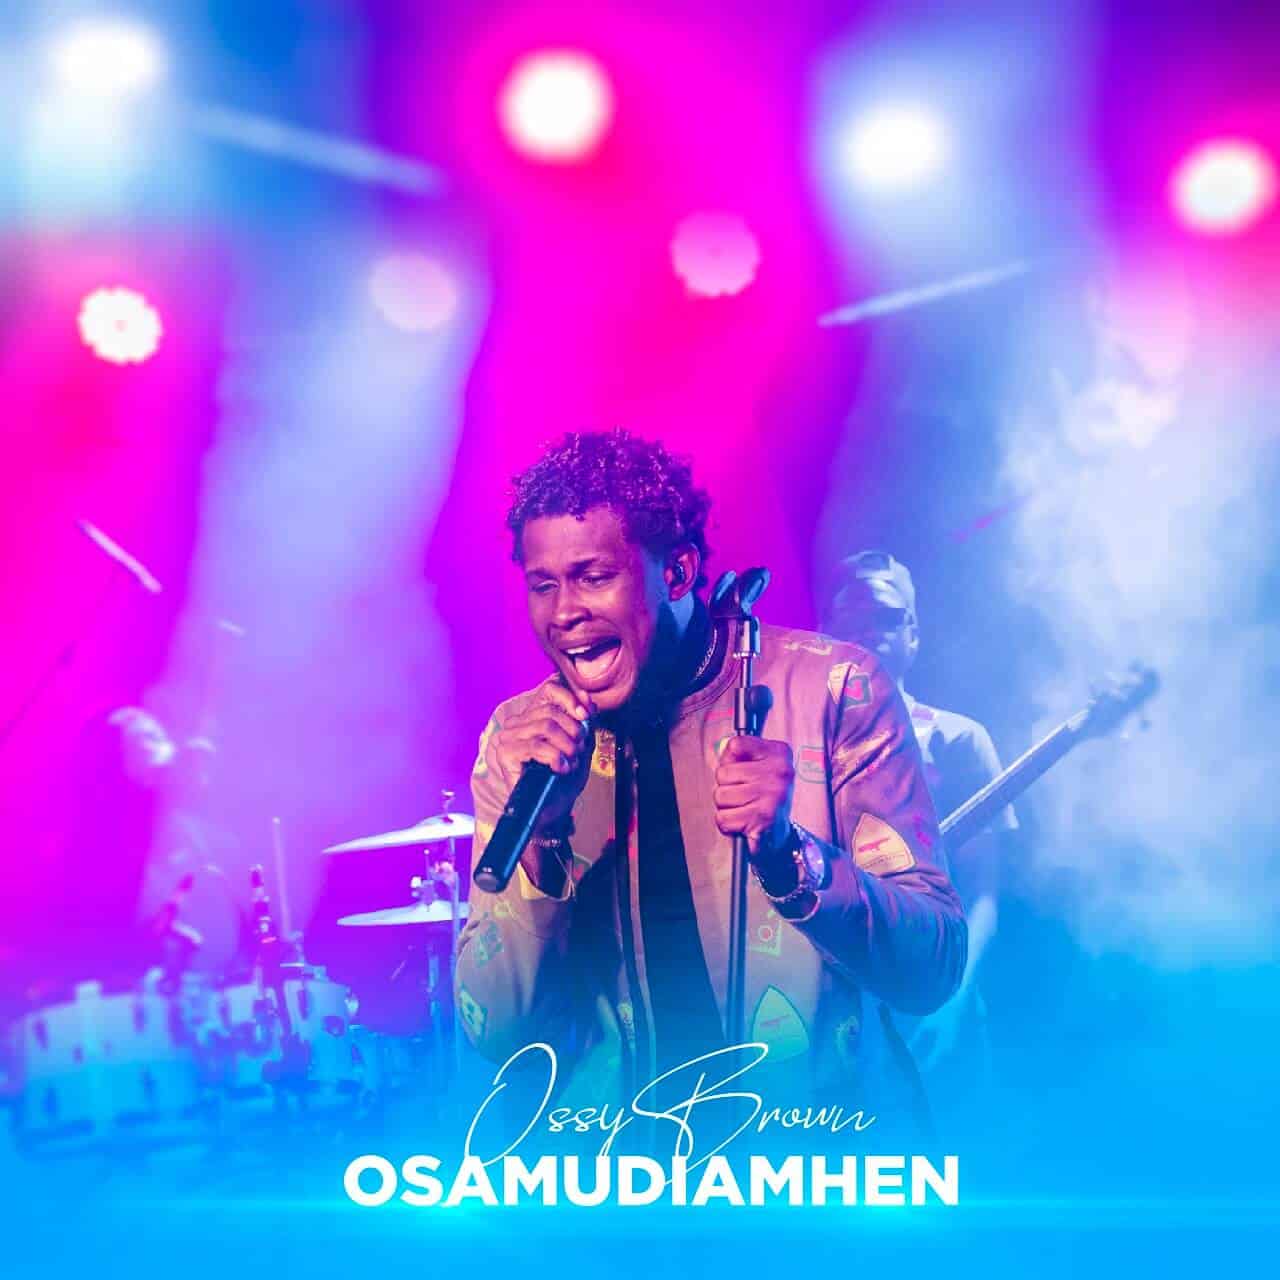 Download Mp3: Ossy Brown - Osamudiamhen